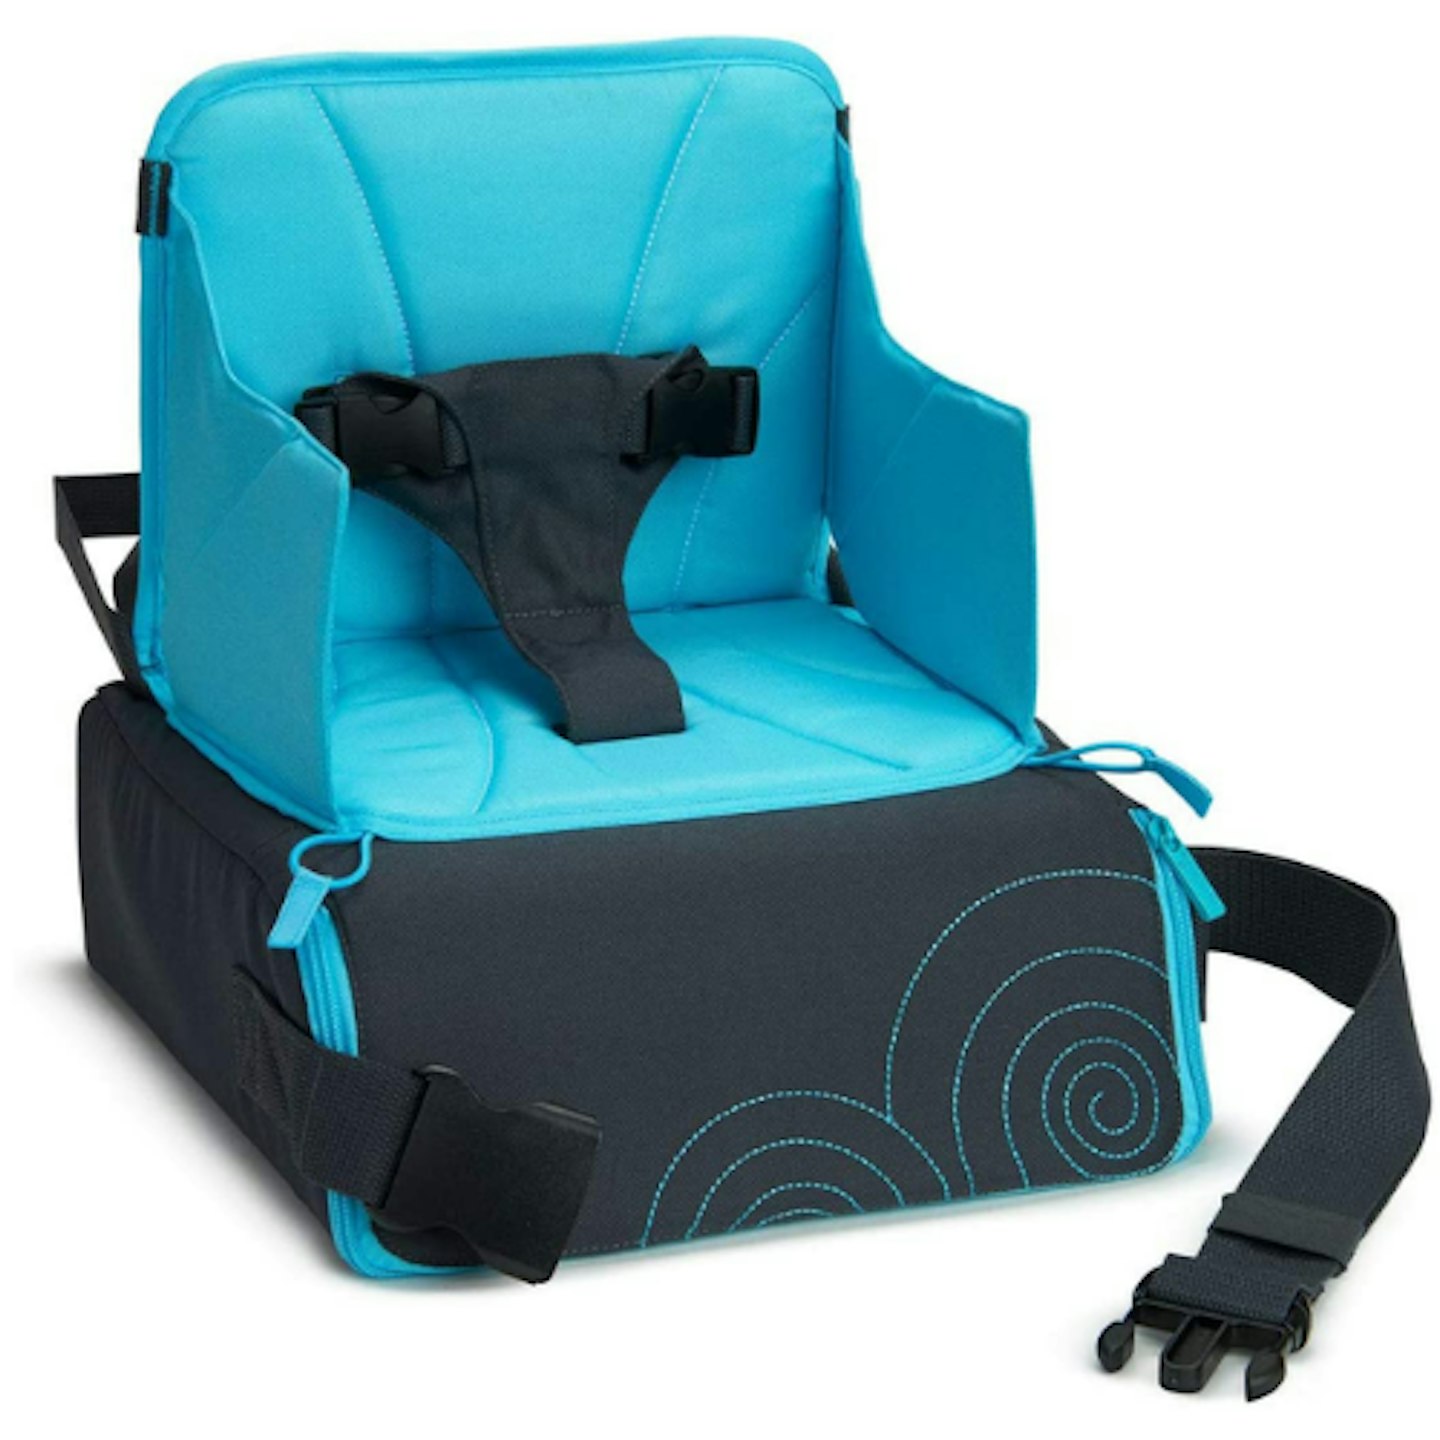 Booster Seat – to help reach the table